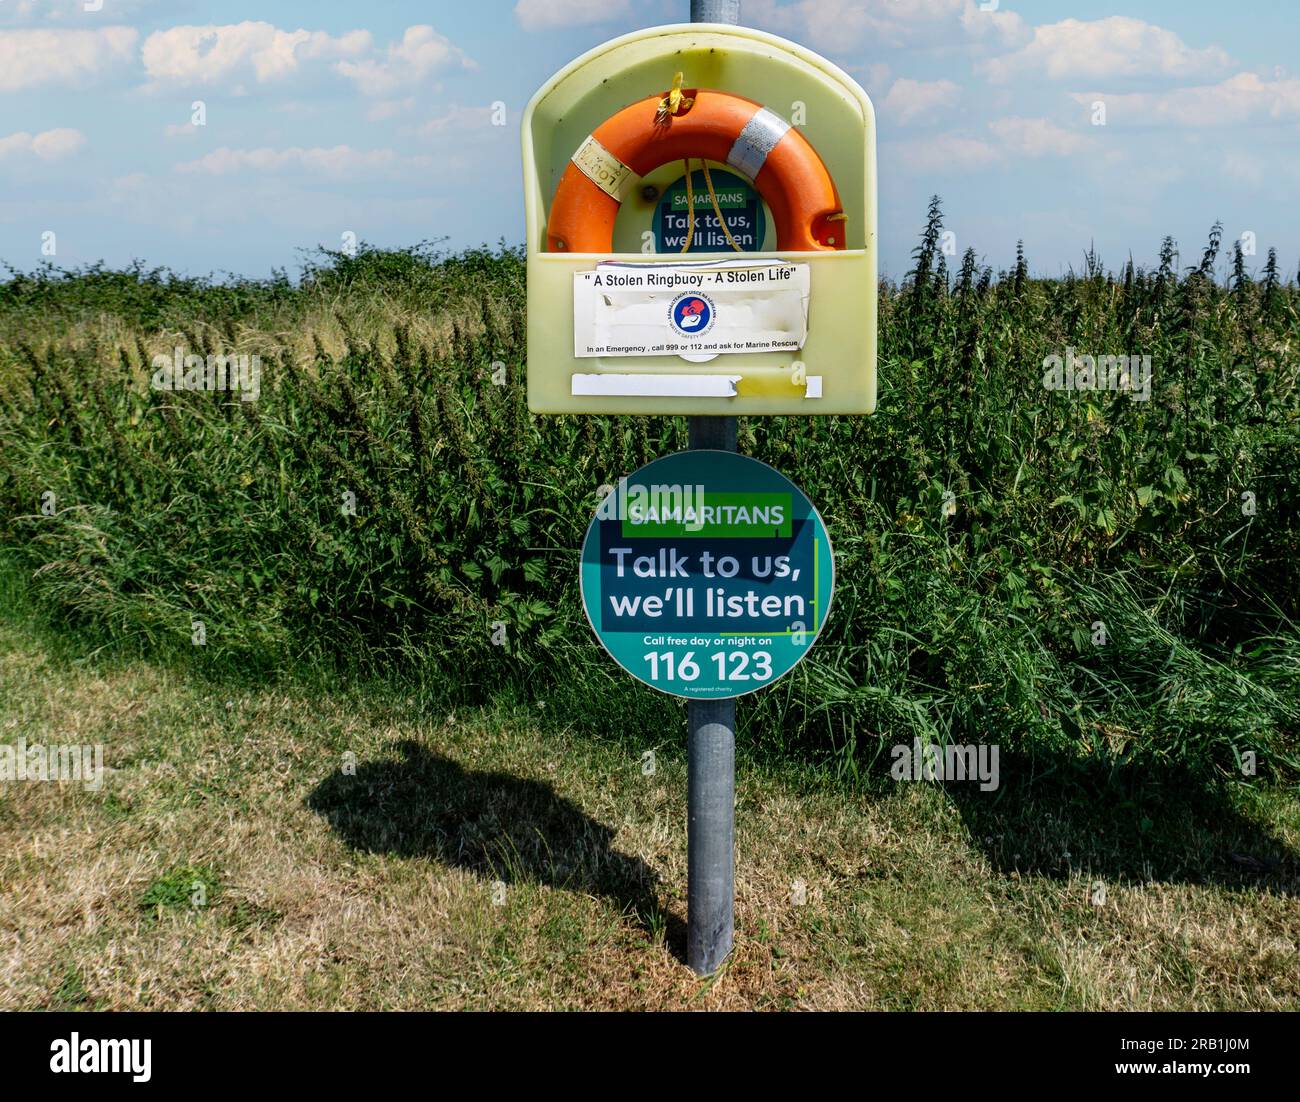 A sign for The Samaritans near a ring buoy with a sign stating that a stolen ring buoy is a stolen life, on the coastline in Co louth, Ireland. Stock Photo